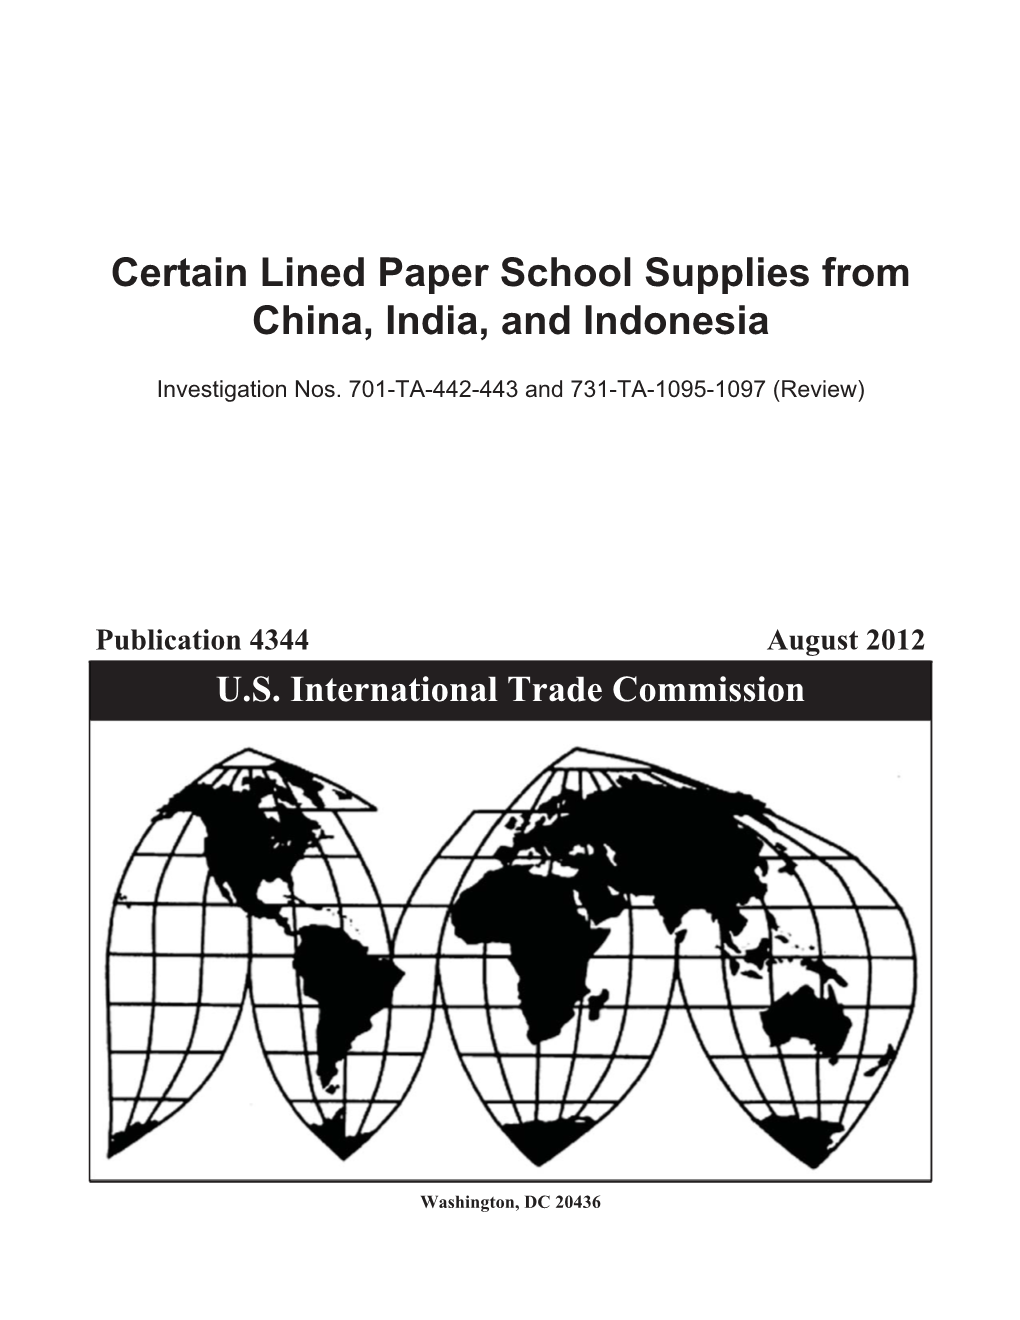 Certain Lined Paper School Supplies from China, India, and Indonesia